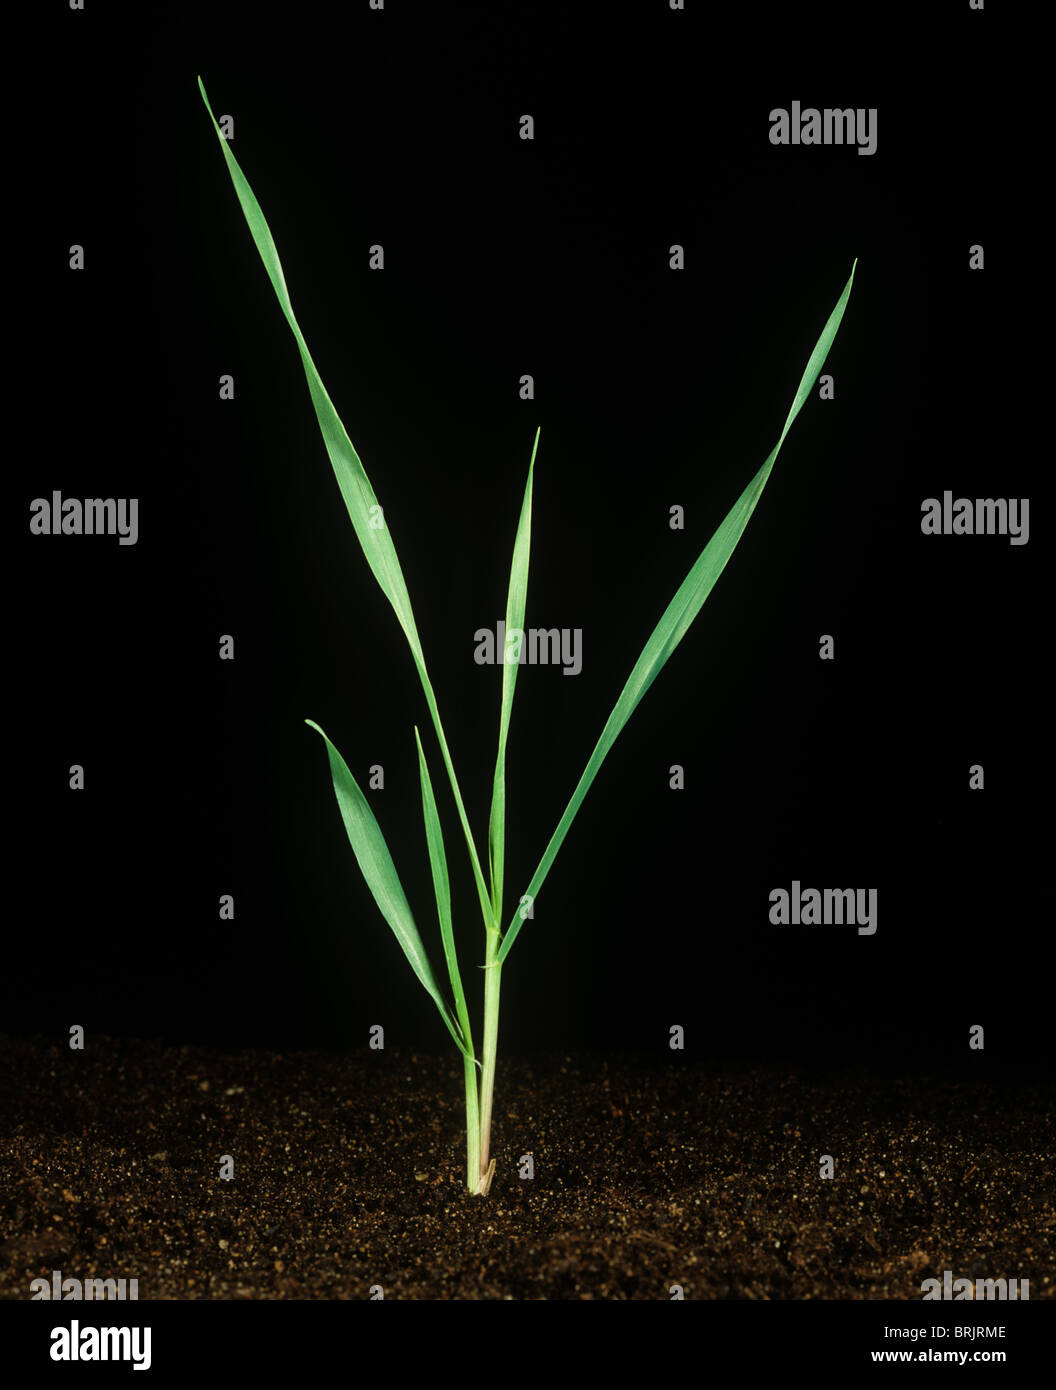 Barley seedling at growth stage 21 against a black background Stock Photo